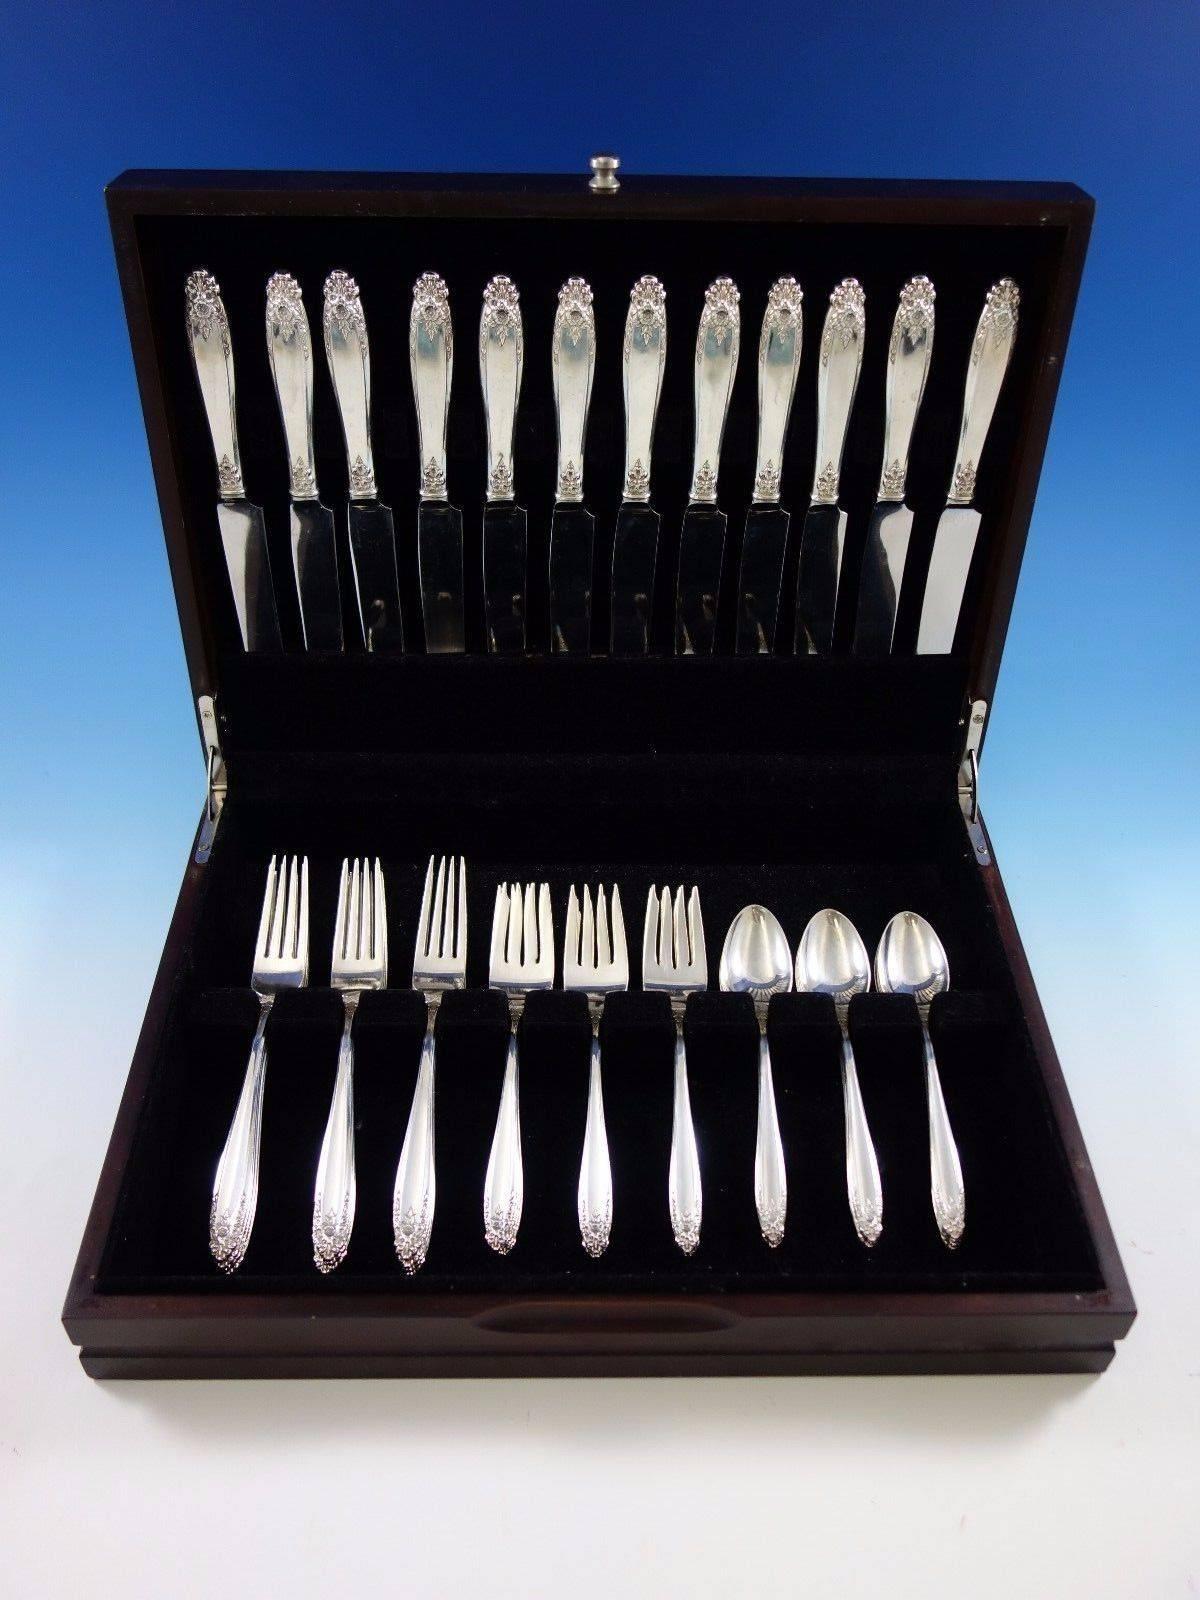 Prelude by international sterling silver flatware set 48 pieces. This set includes: 
12 knives, 9 1/8